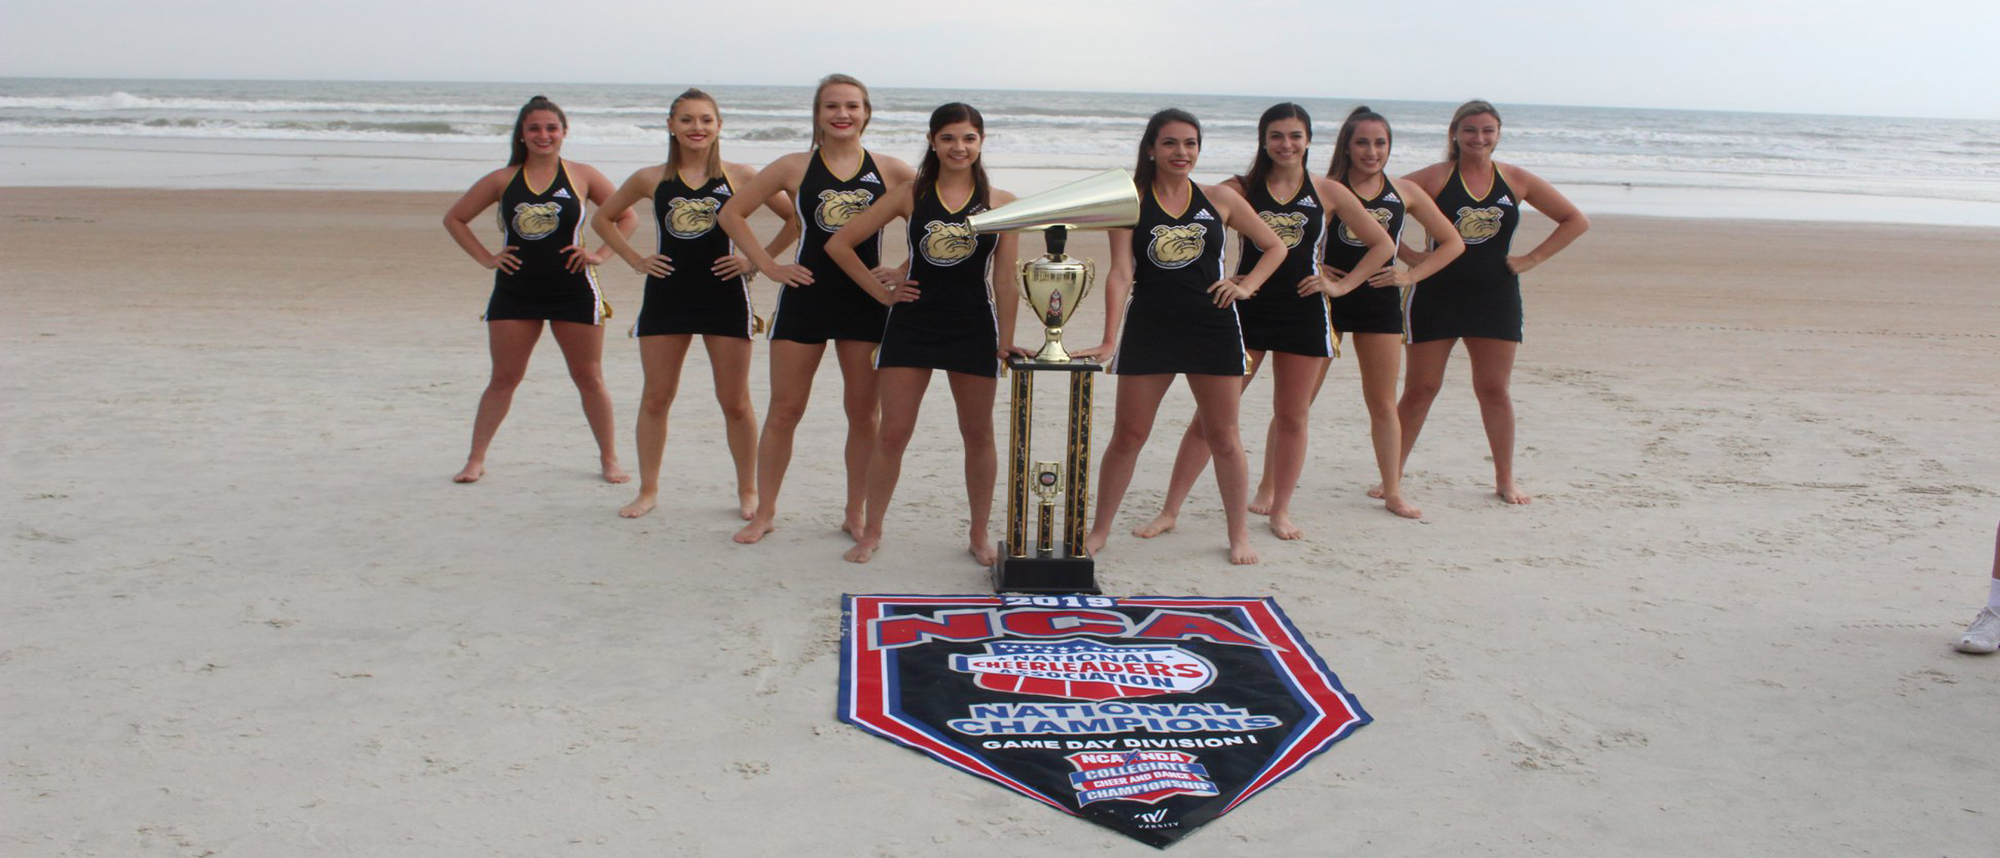 CHEER AND DANCE WIN D1 "GAMEDAY" NATIONAL CHAMPIONSHIP